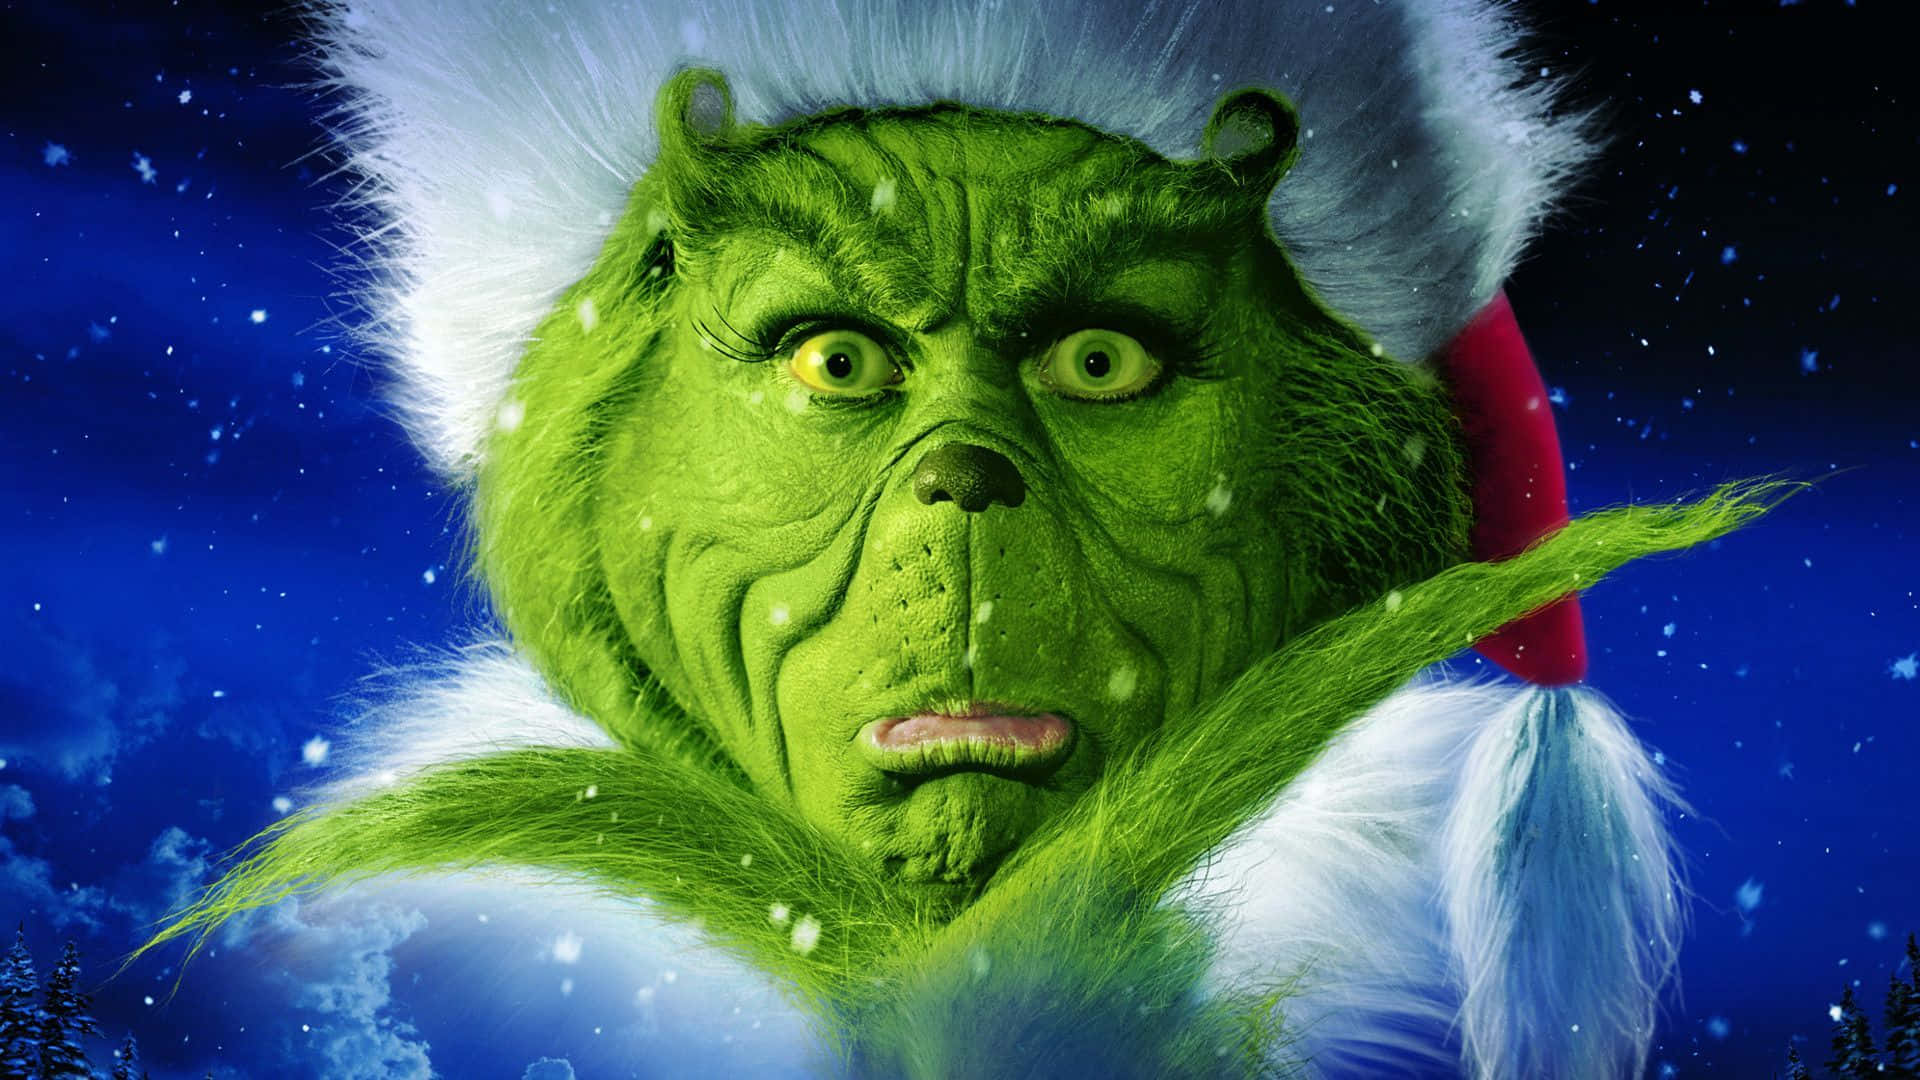 Get Into The Christmas Spirit With The Grinch! Background